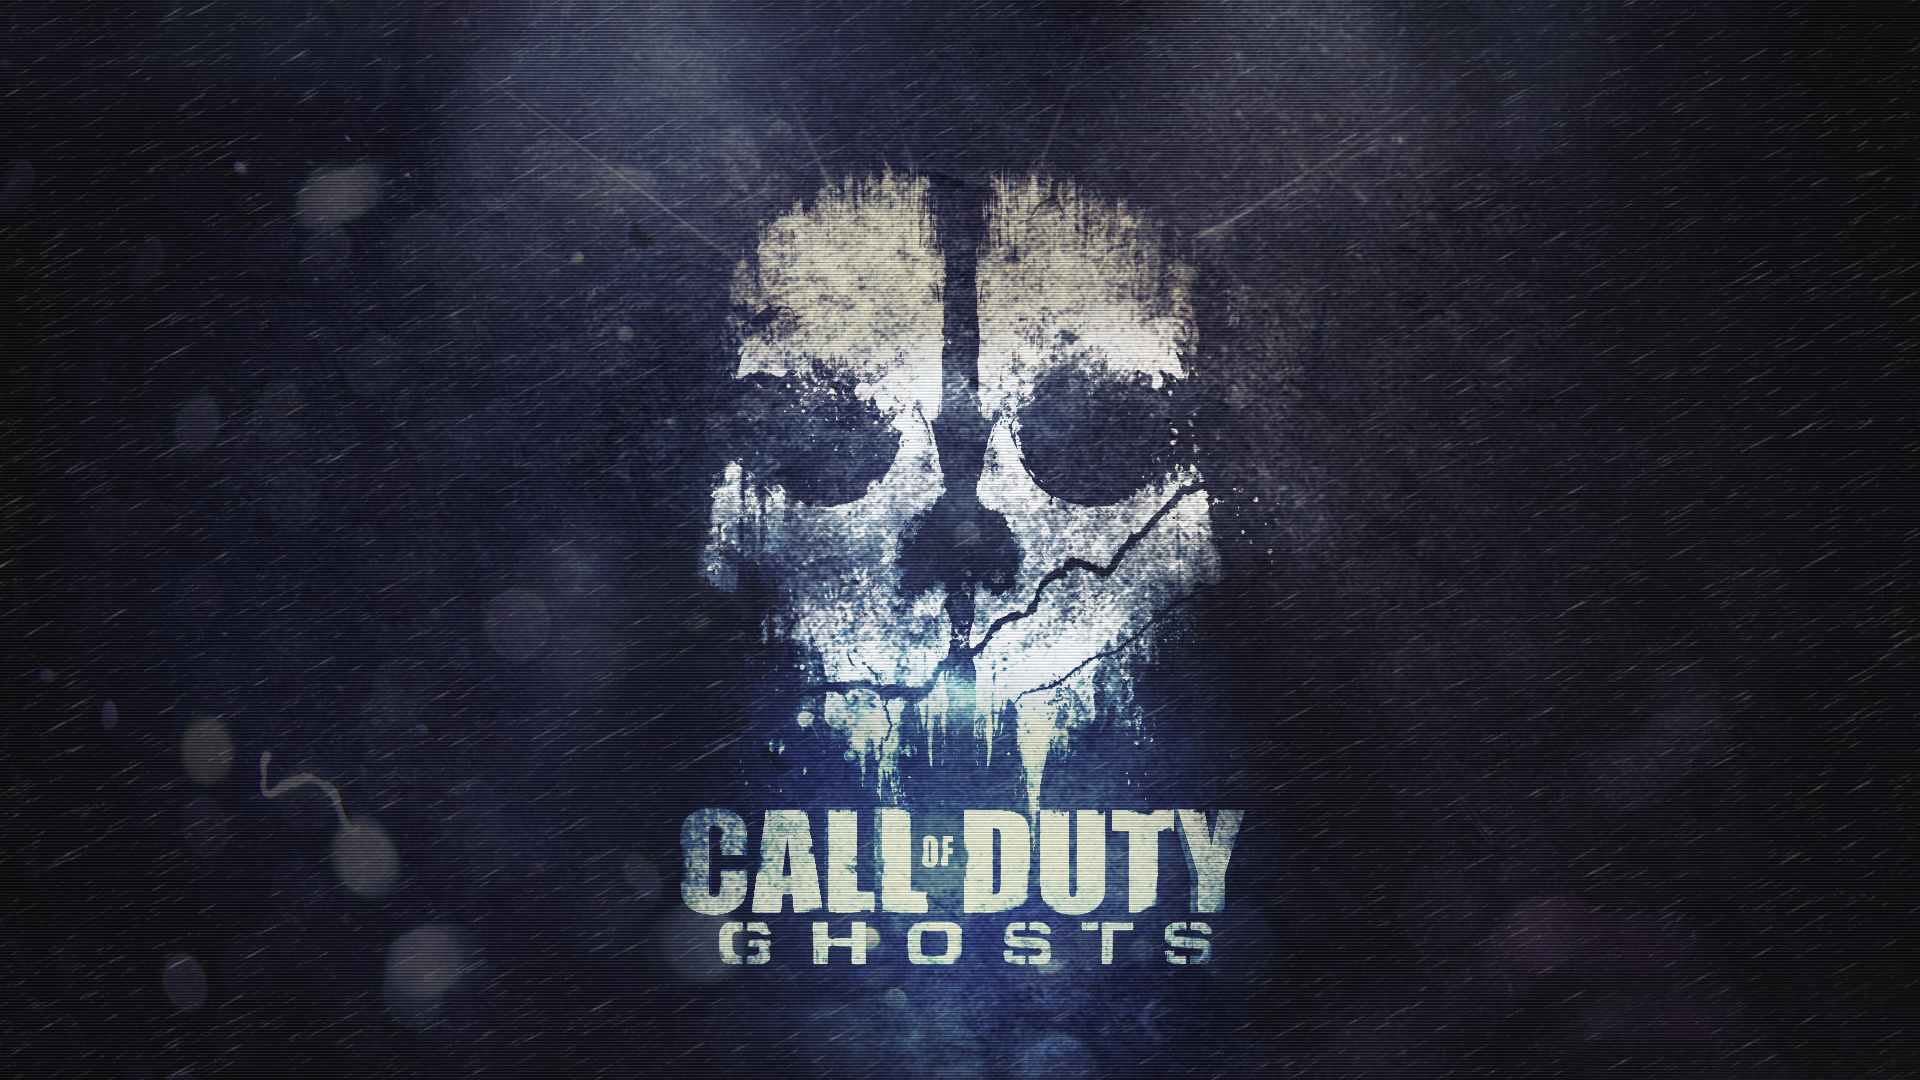 Call of Duty Ghosts Wallpaper 1 1920x1080